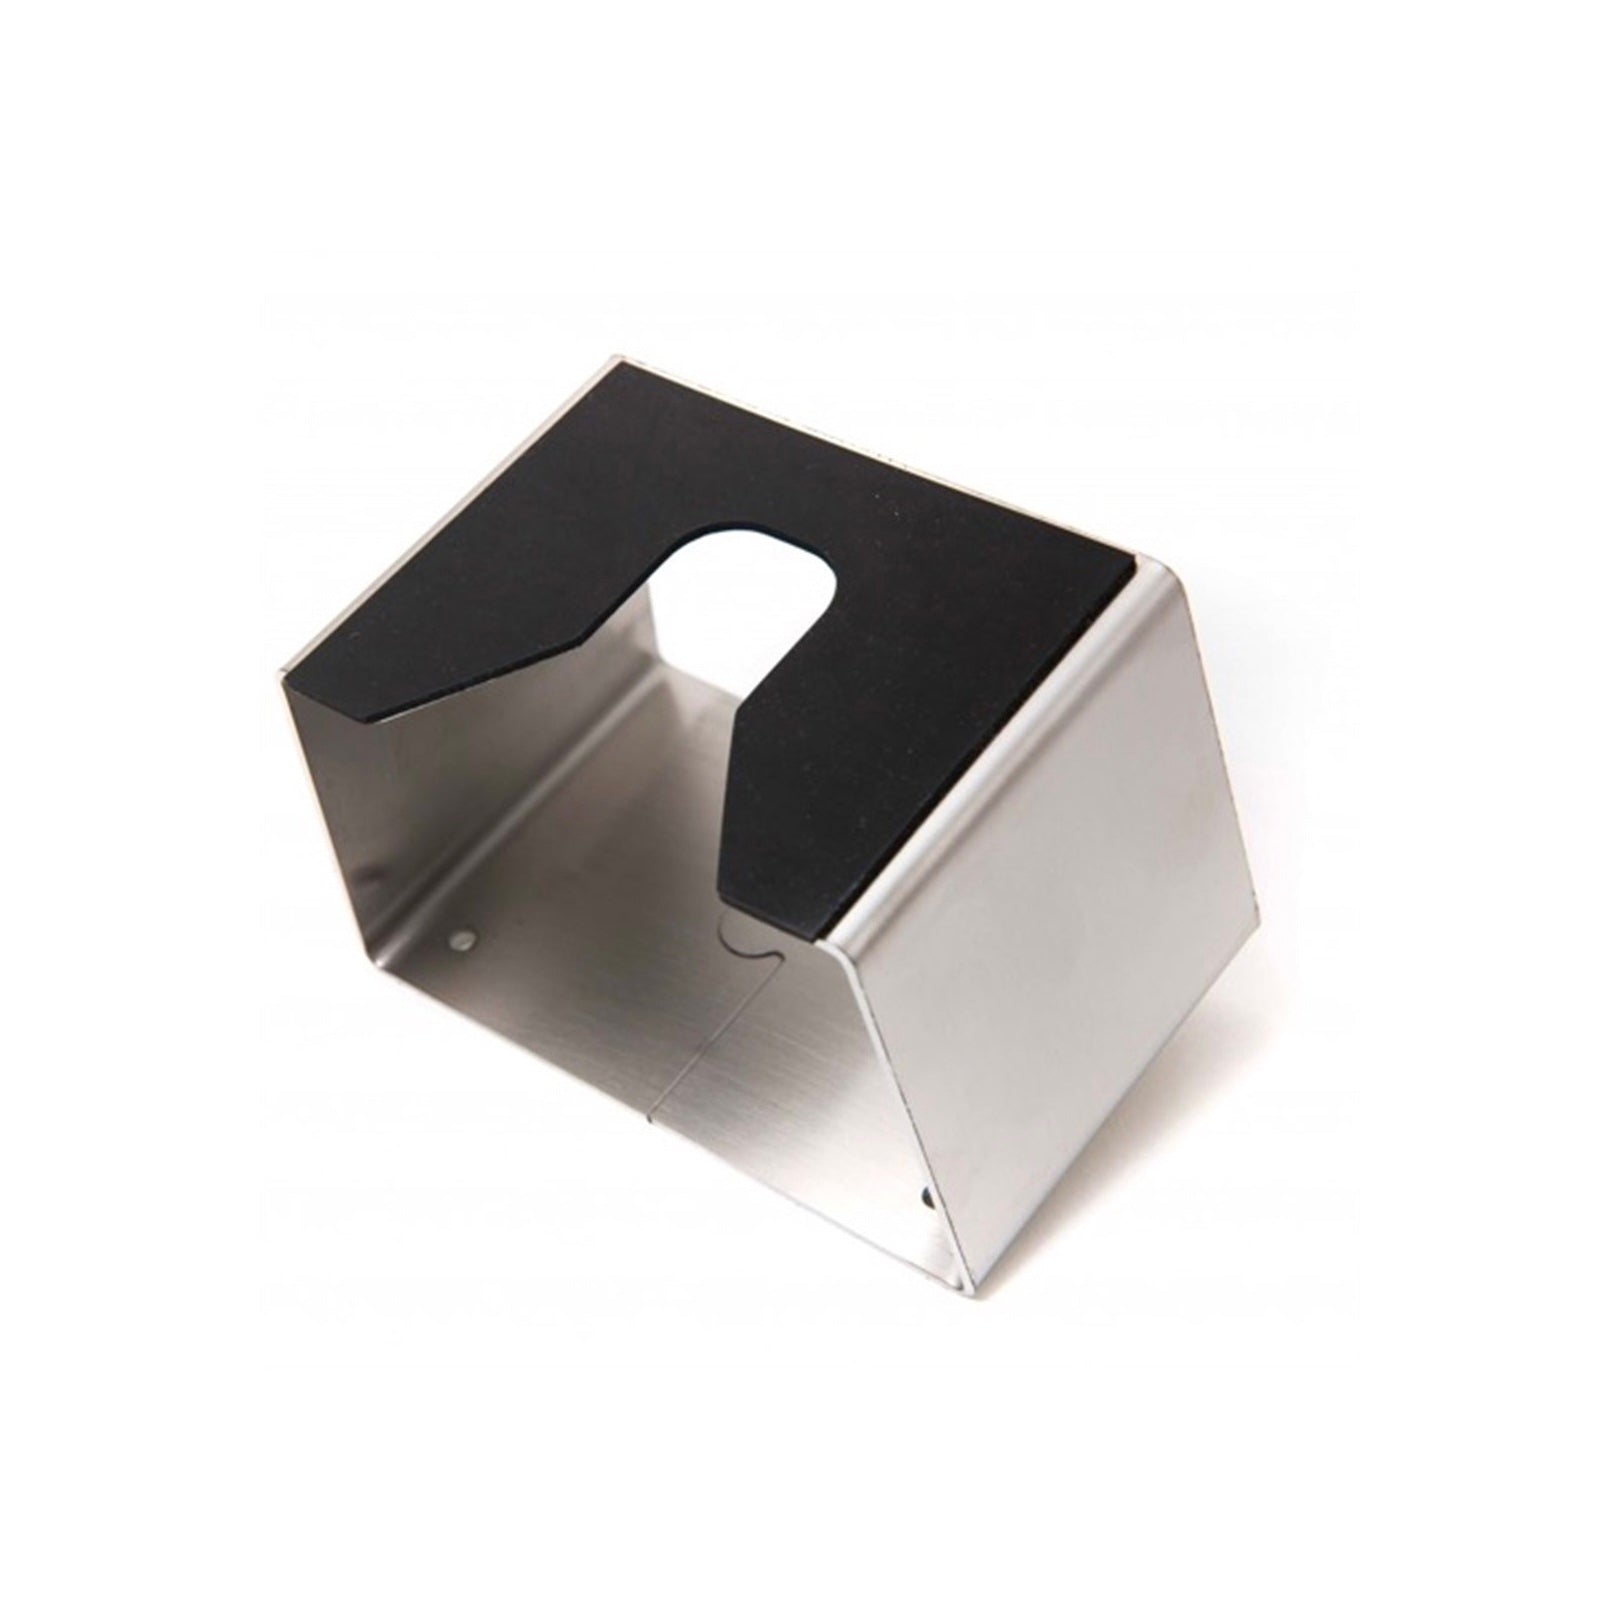 Porterfilter support cube